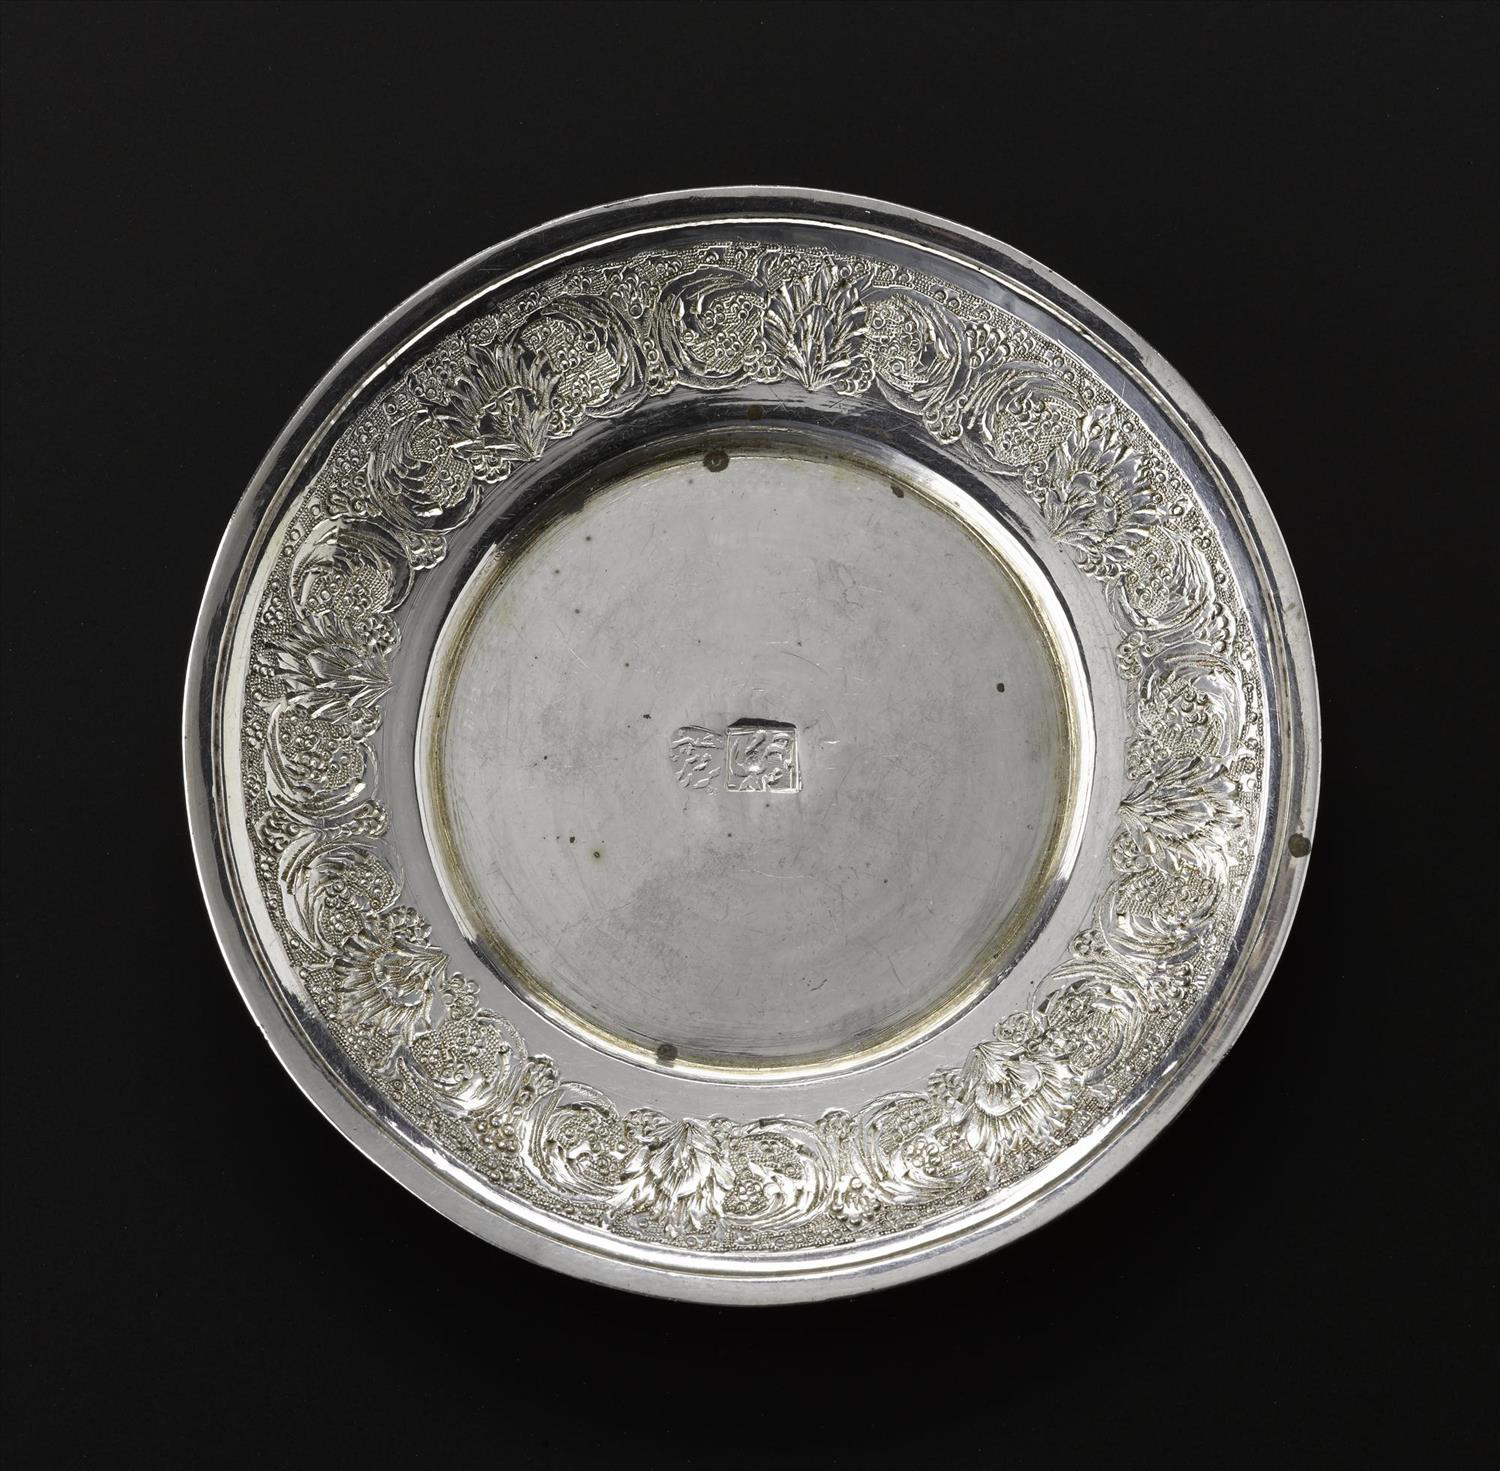 Miniature saucer of silver with floral decoration around the outside rim and hallmarked in the centre, part of a set with a cup and a spoon, Iran, probably Isfahan, 1920s-1940s, acc. no V.2015.68.2